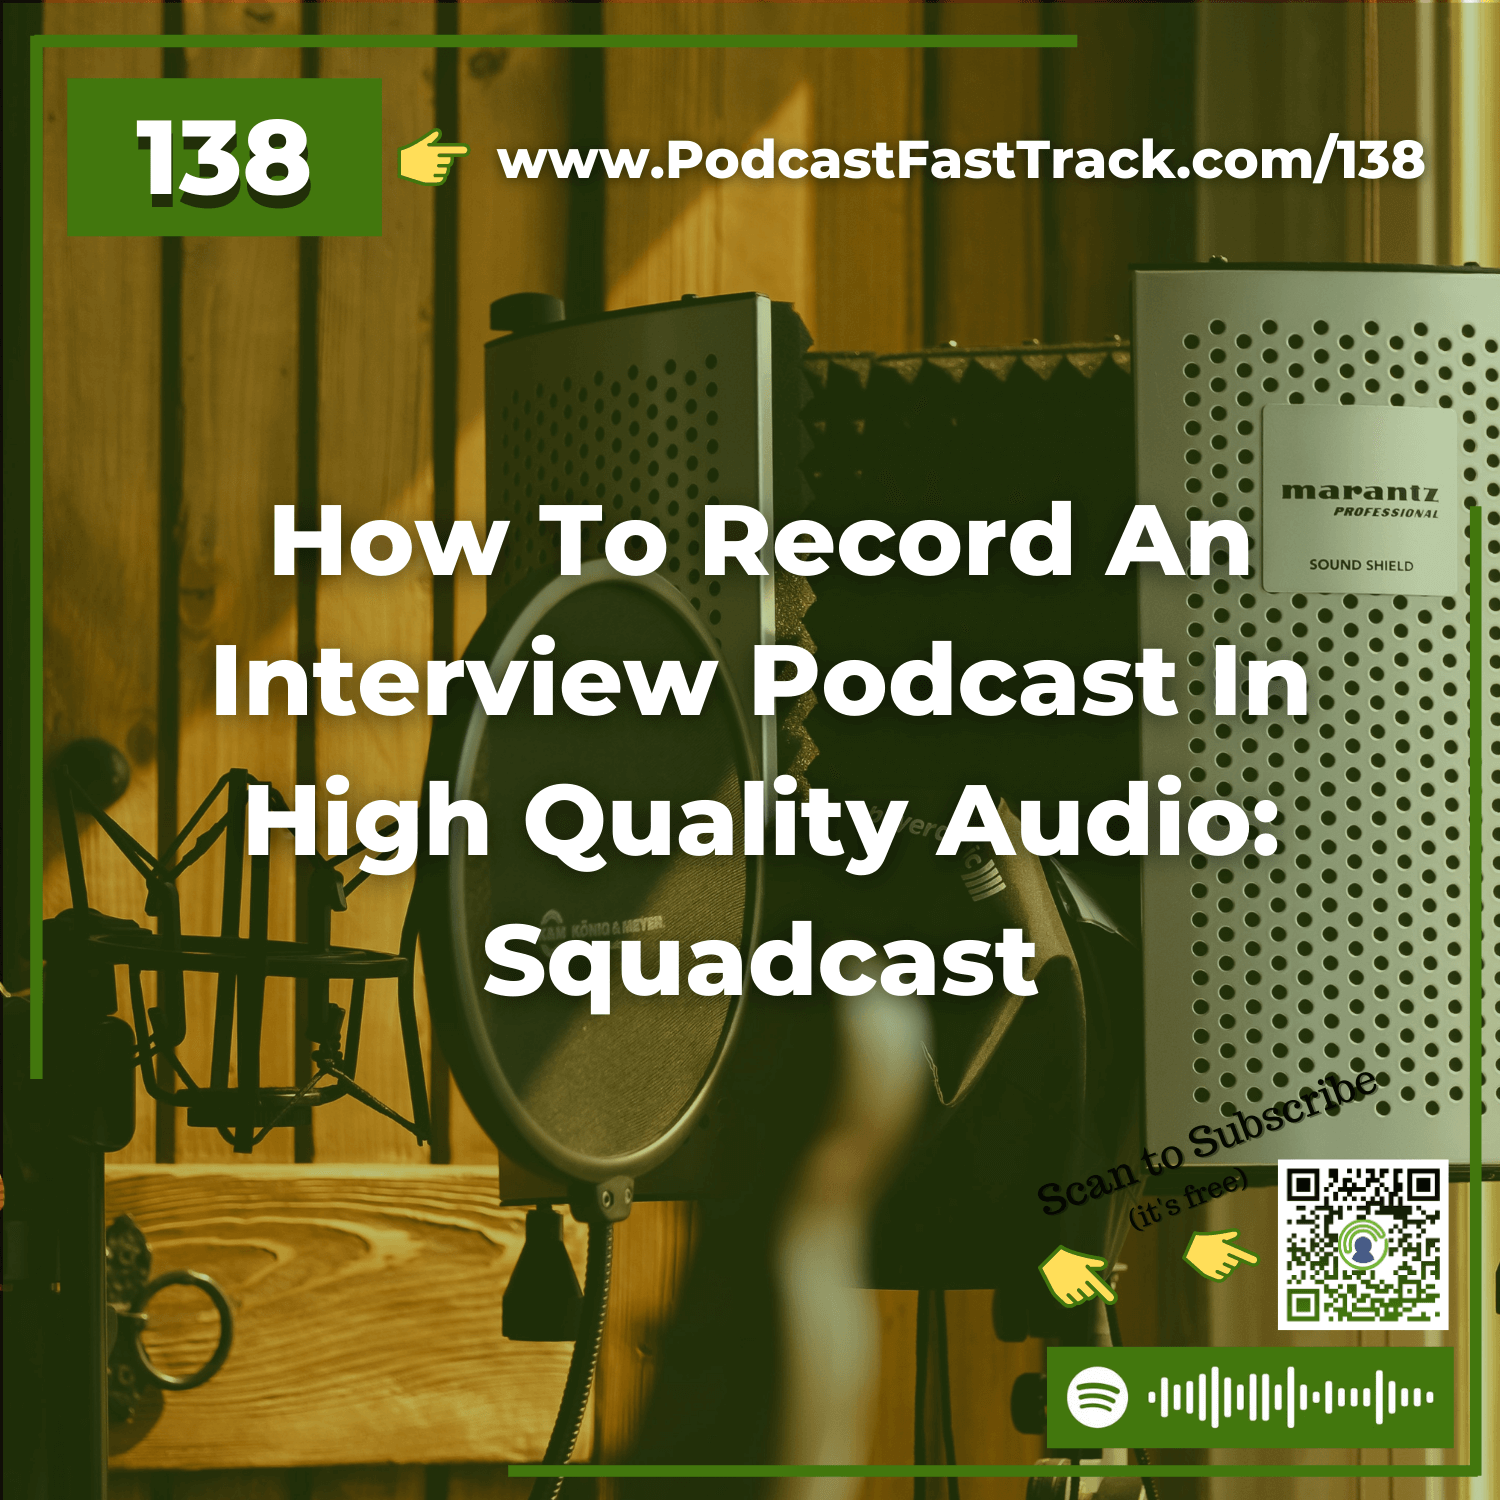 138: How To Record An Interview Podcast In High Quality Audio: Squadcast